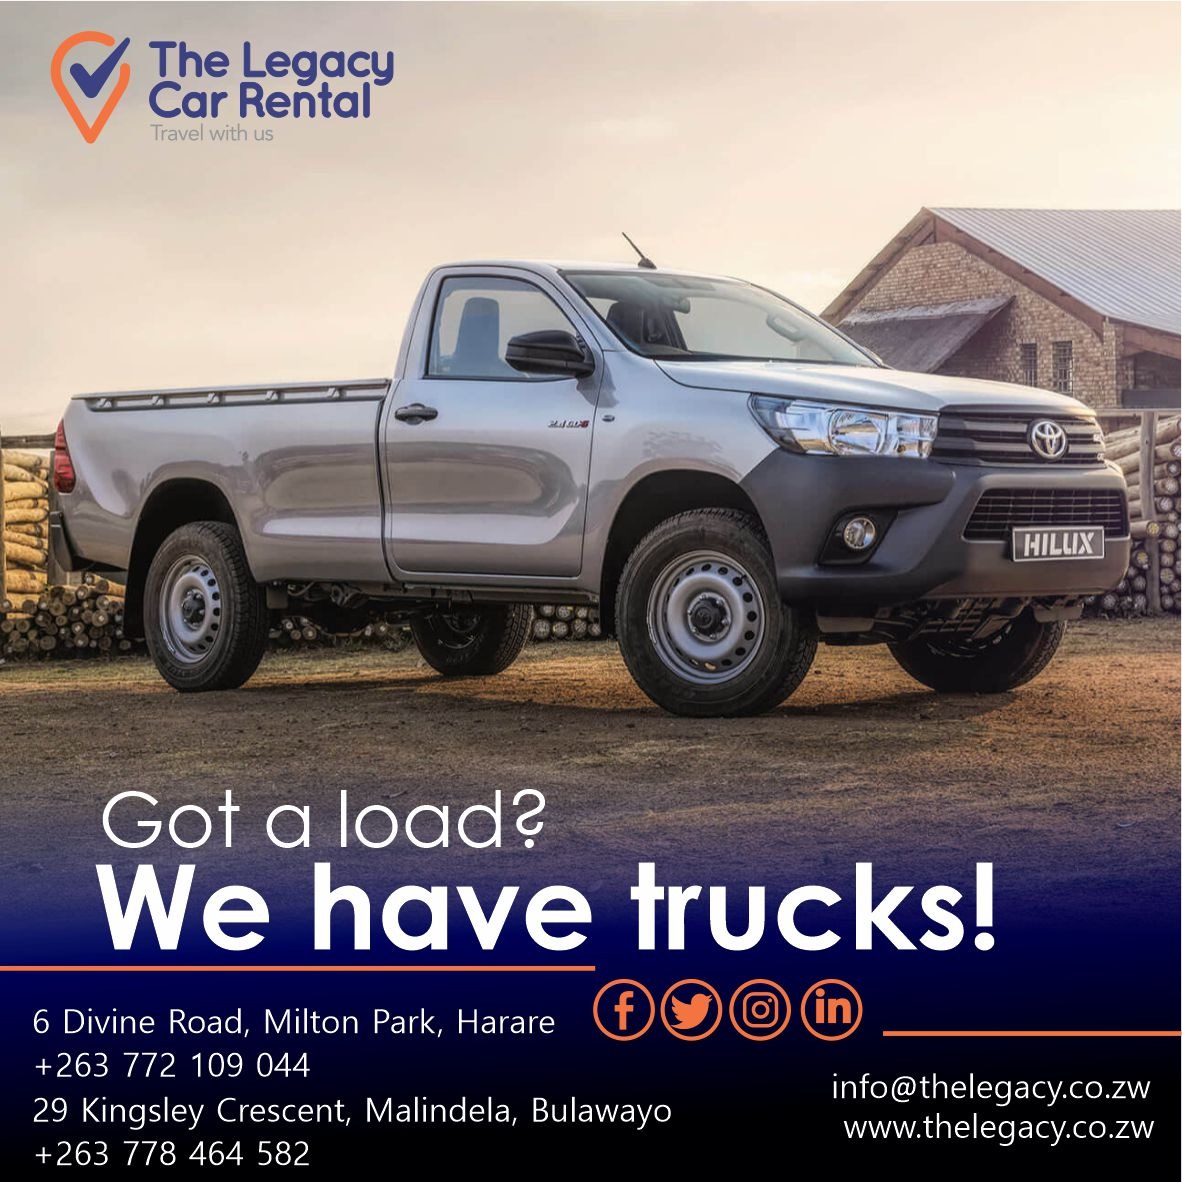 Moving this weekend? Going to the farm? We've got you! Travel with us!
#Moving #farming #allyouneed #JourneywithUs #gotawork #workload #workhorse #familytime #Bakkies #travel #wegotyoucovered #Friday #vehicles #carhire #builttolast #rental #singlecab #team #booknow #travelwithus